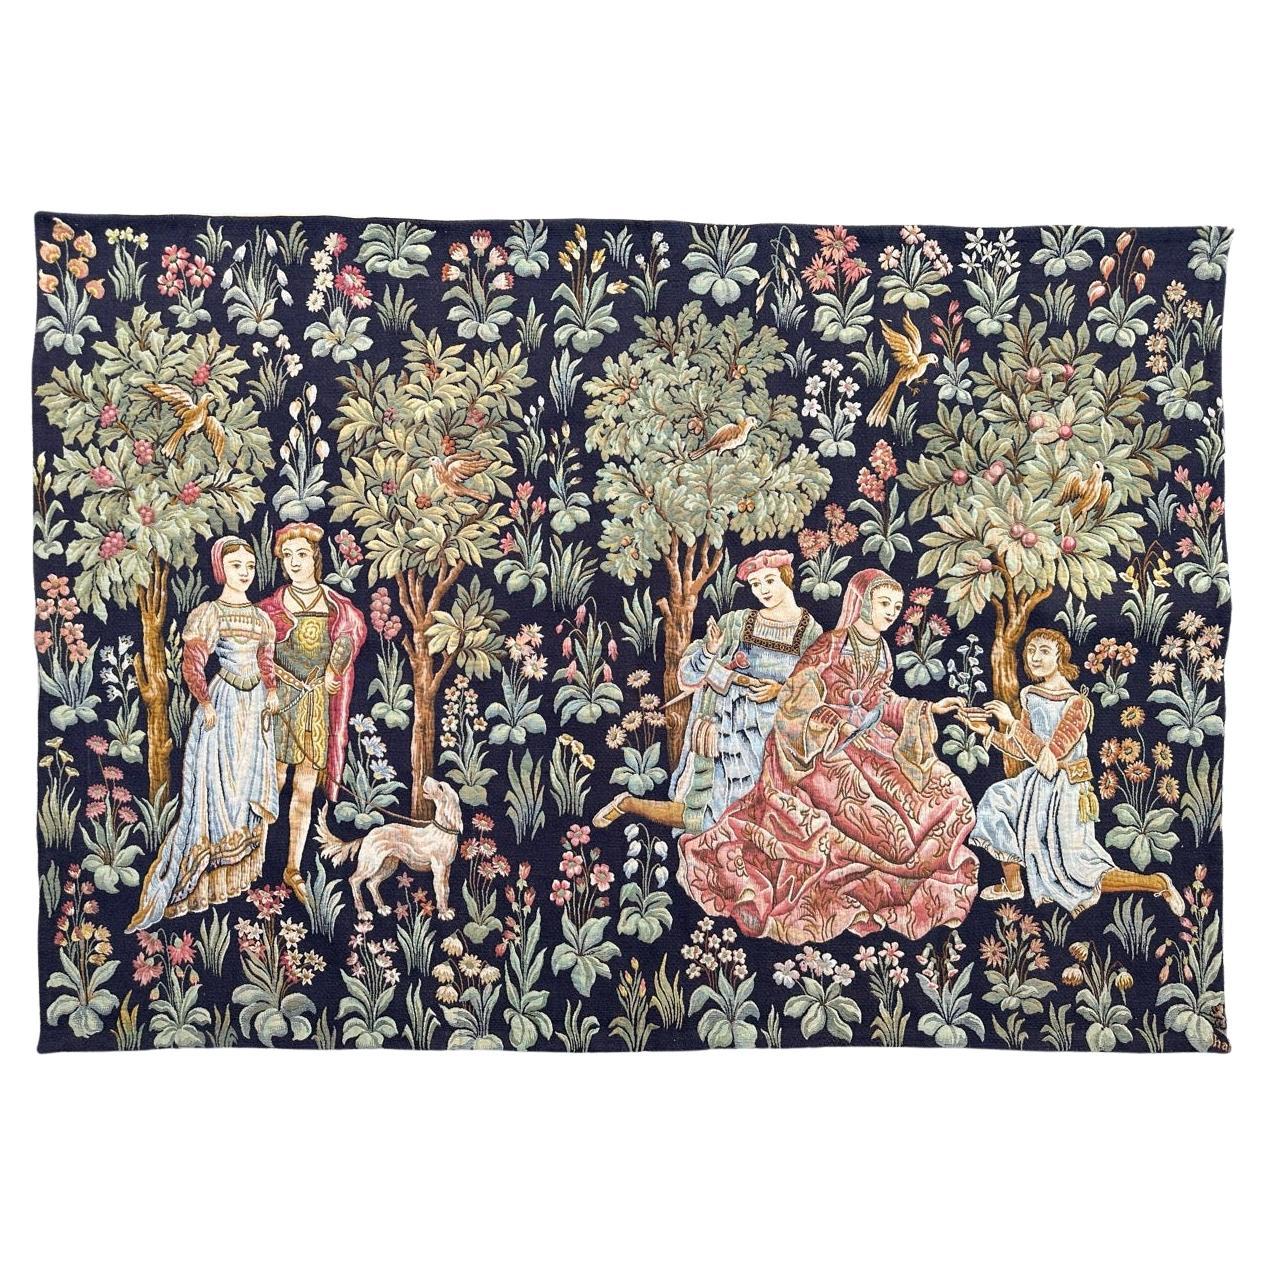 Bobyrug's Pretty Jaquar Tapestry Aubusson Museum Style Medieval Design